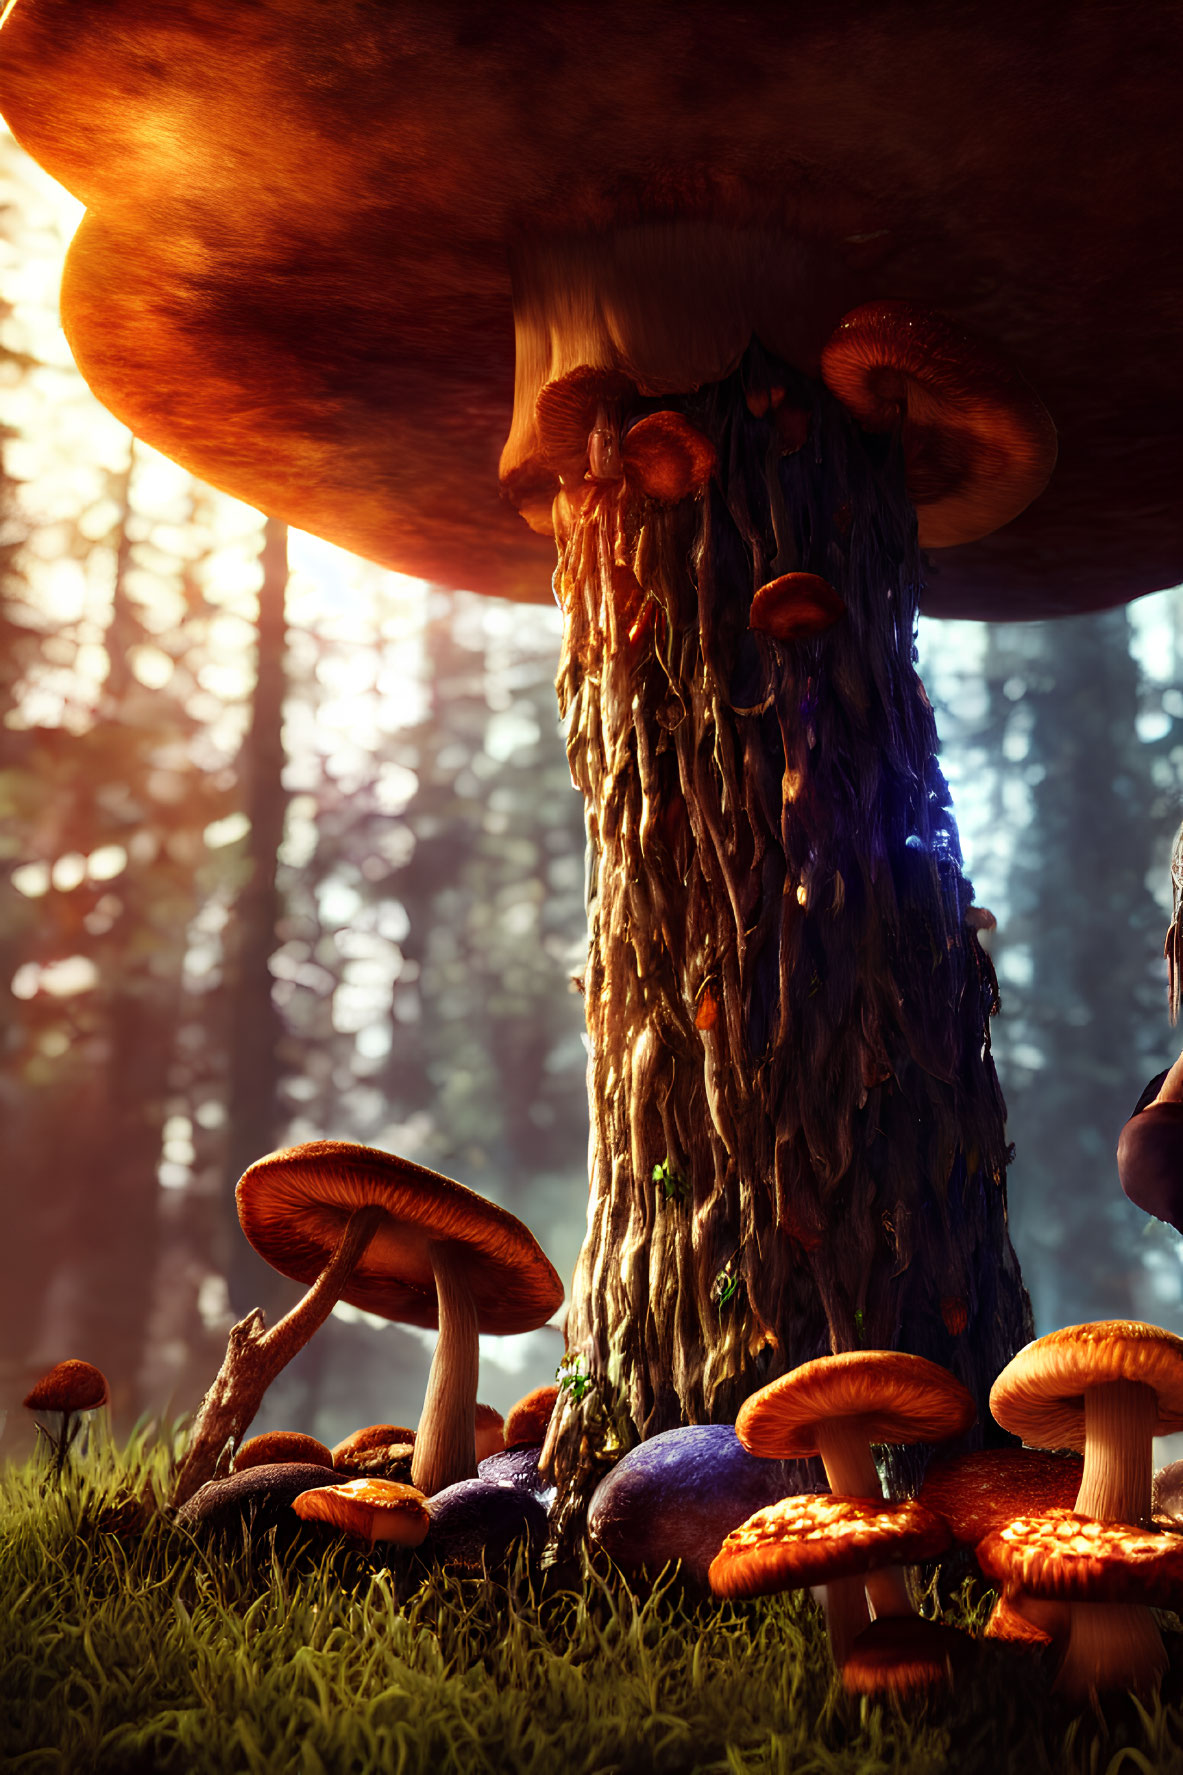 Enchanting forest scene with towering mushrooms and golden light